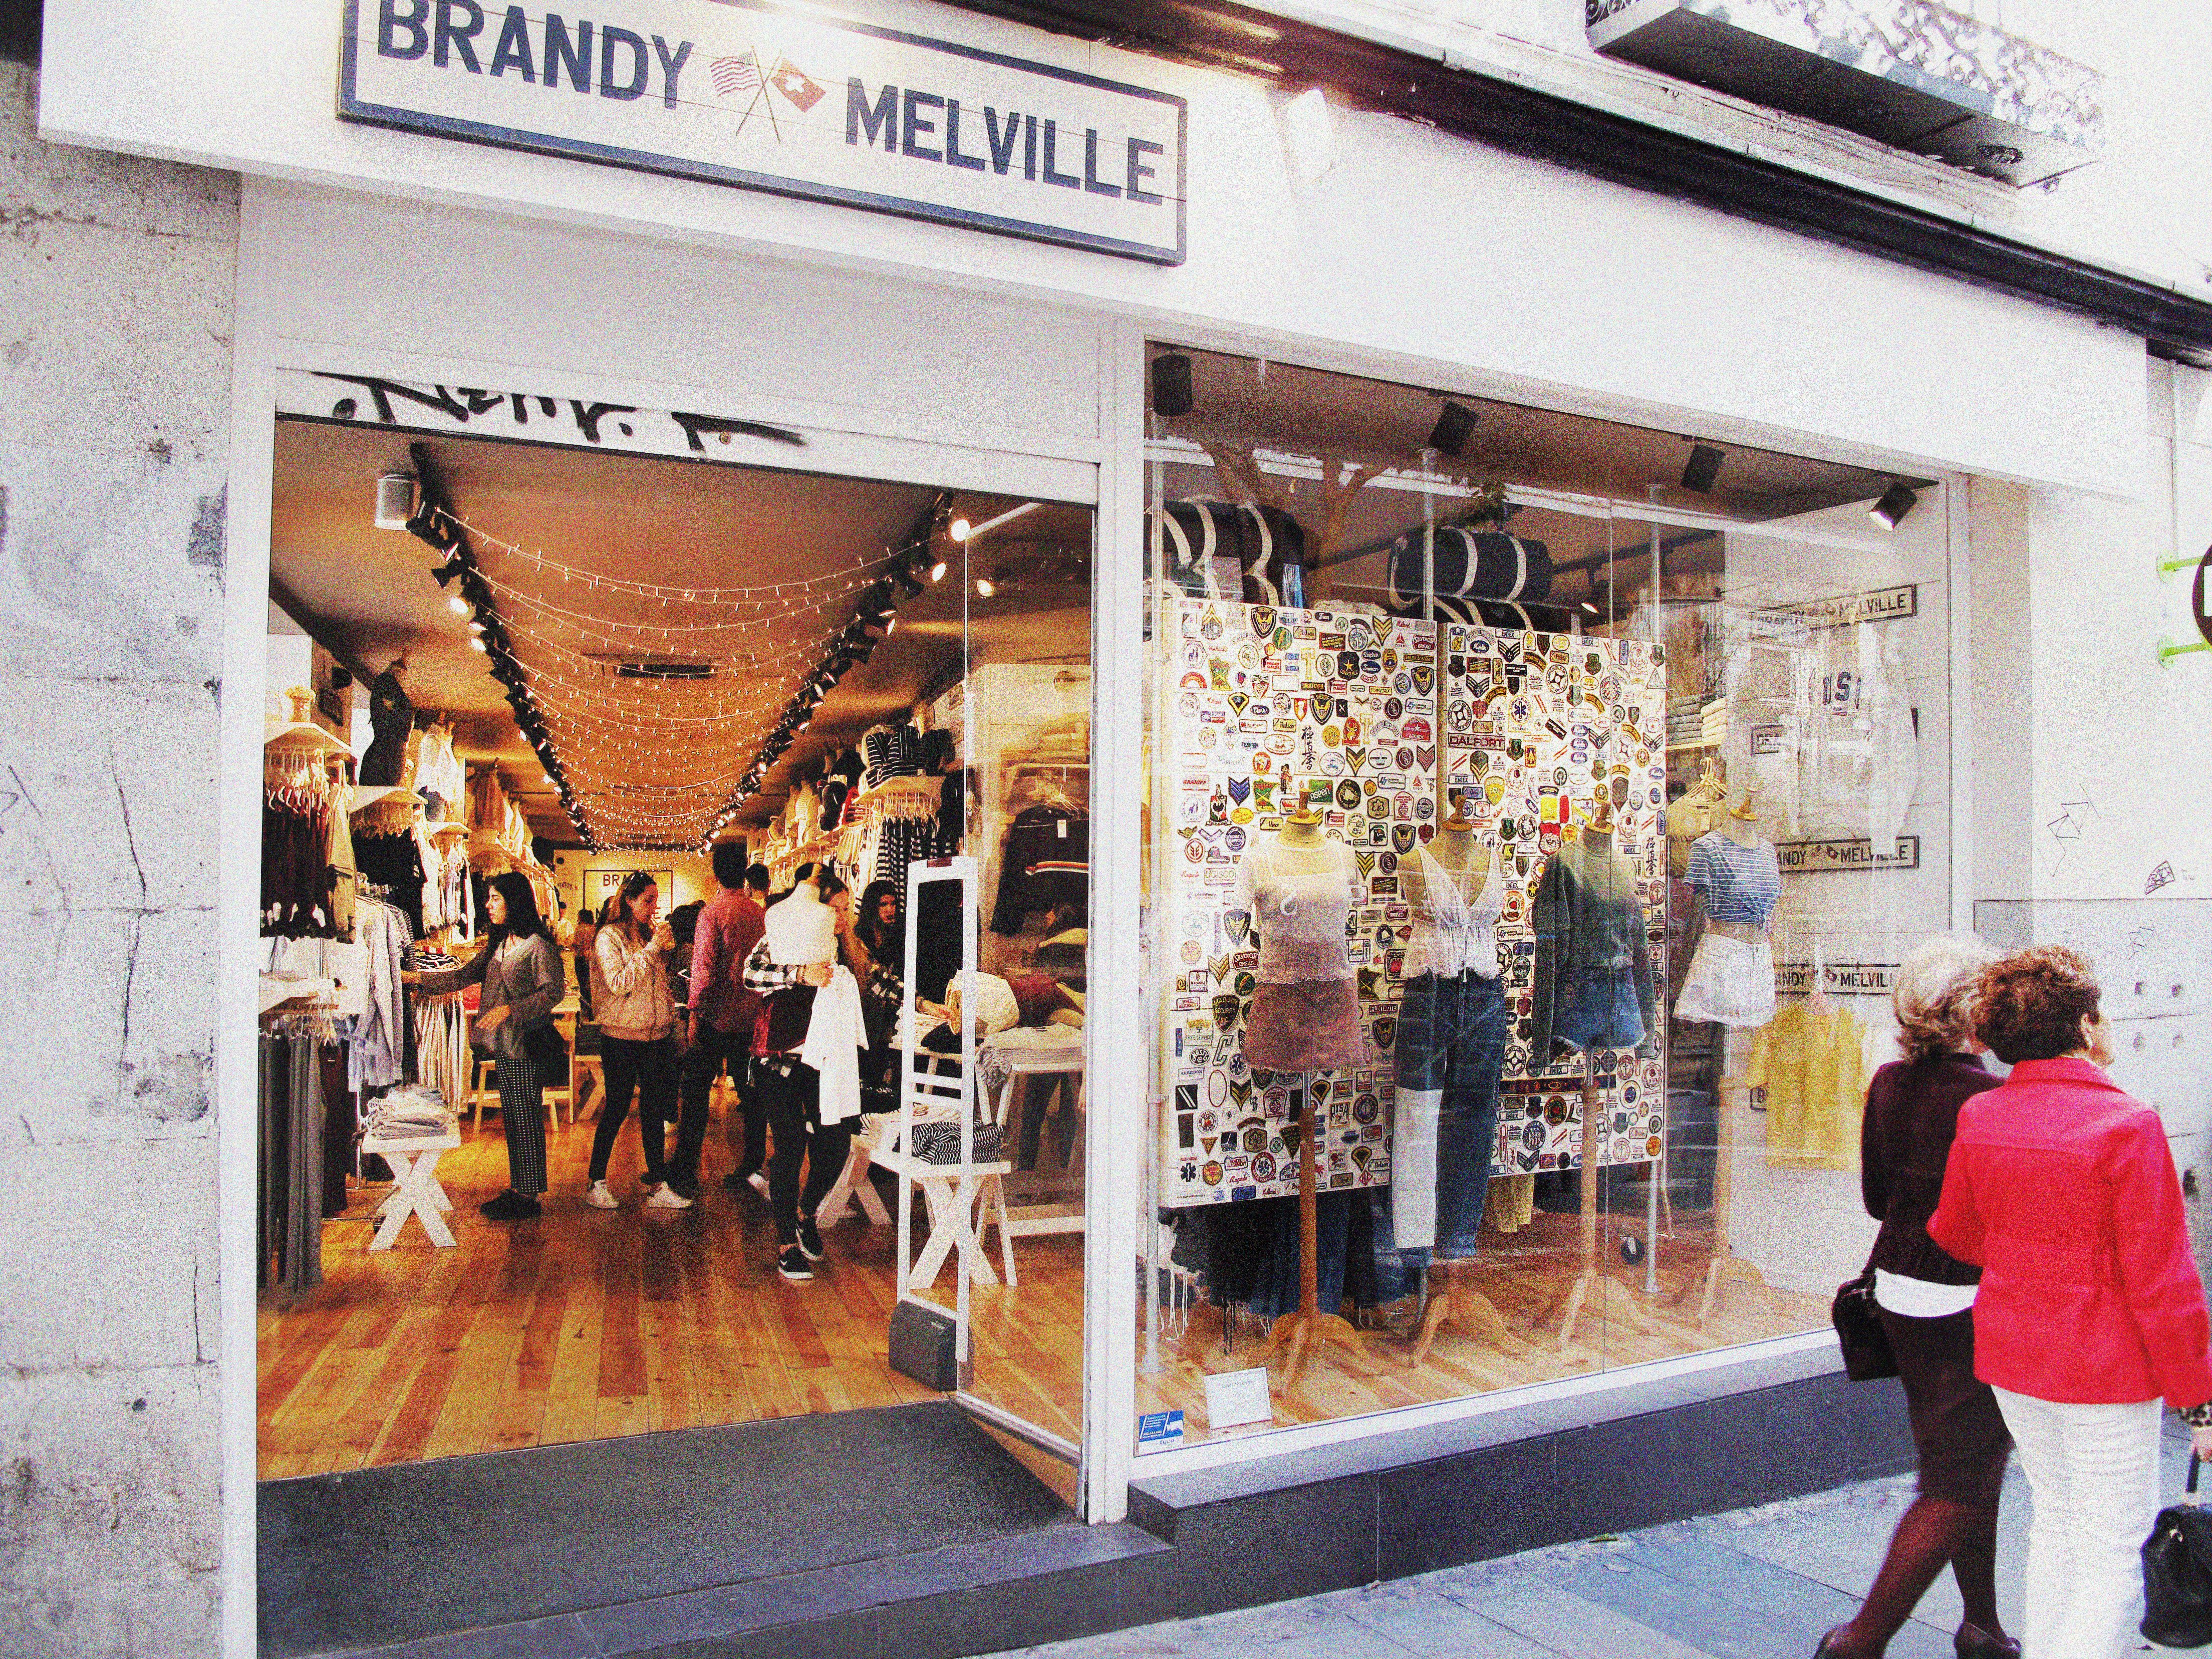 Working at Brandy Melville Sounds Like an Absolute Nightmare